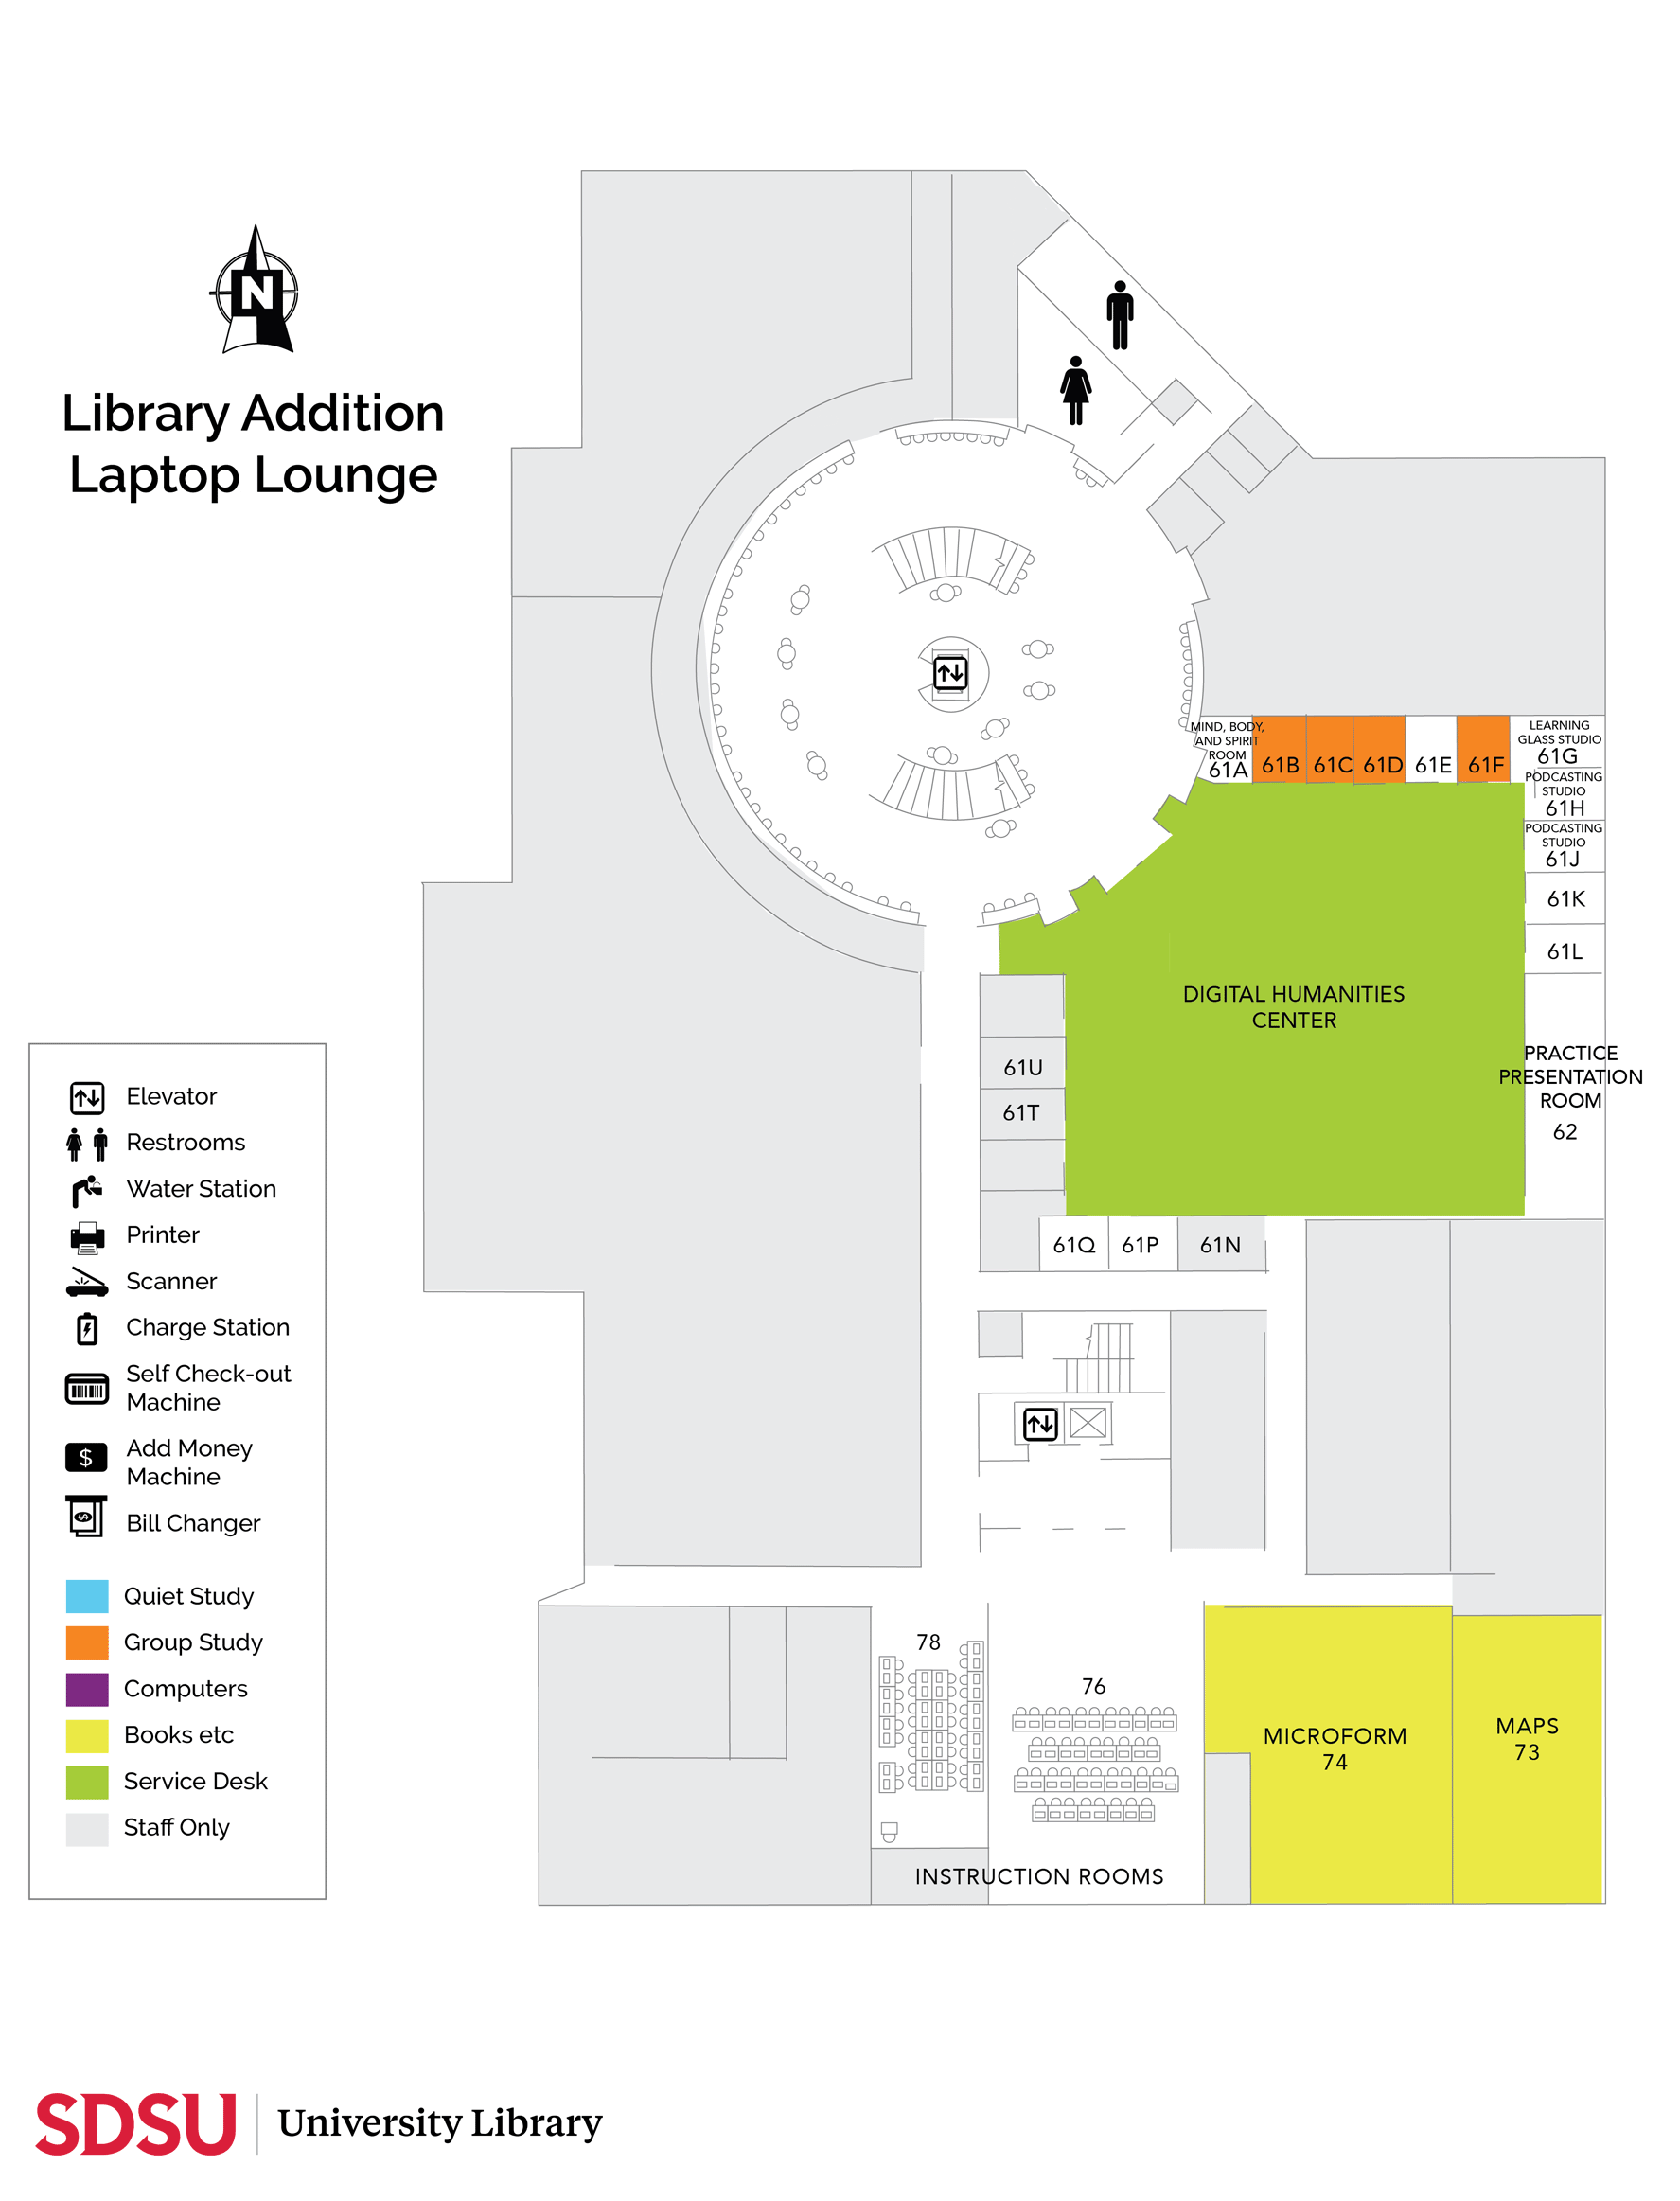 Library Addition Laptop Lounge and DH Center Floor Map